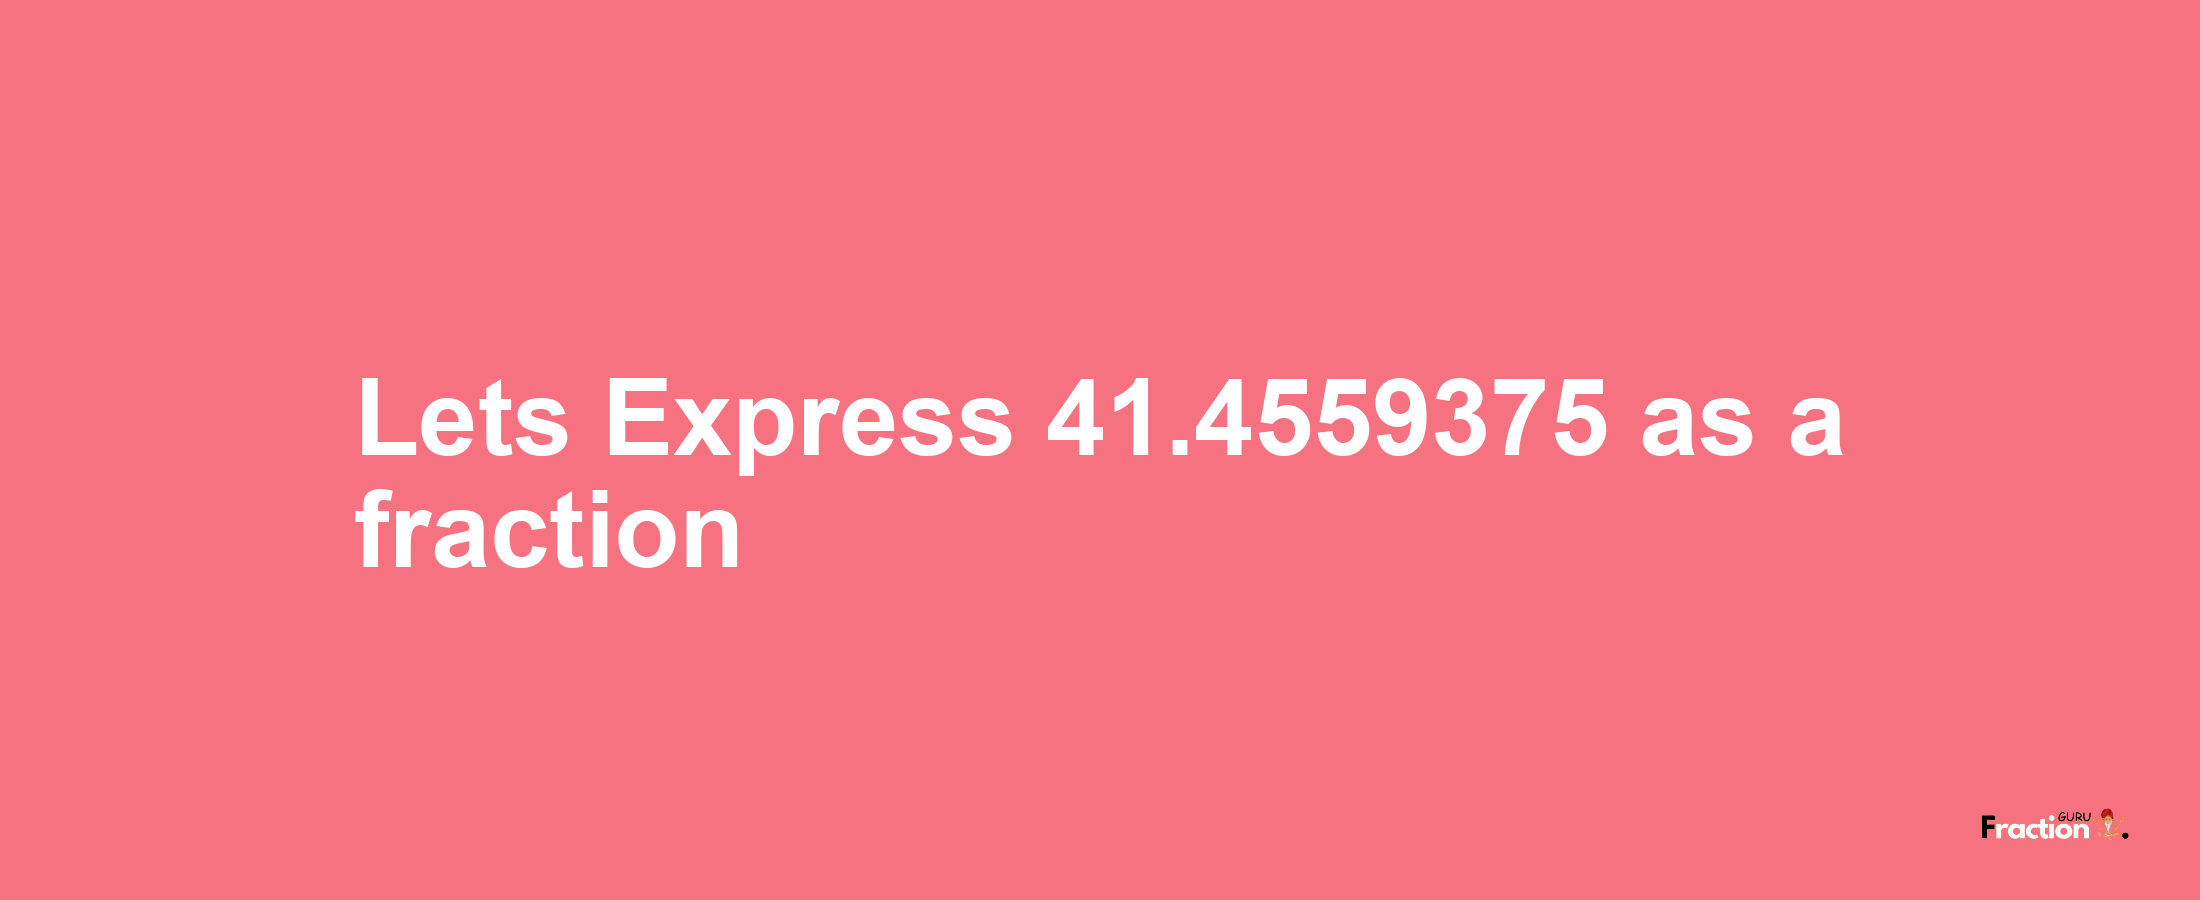 Lets Express 41.4559375 as afraction